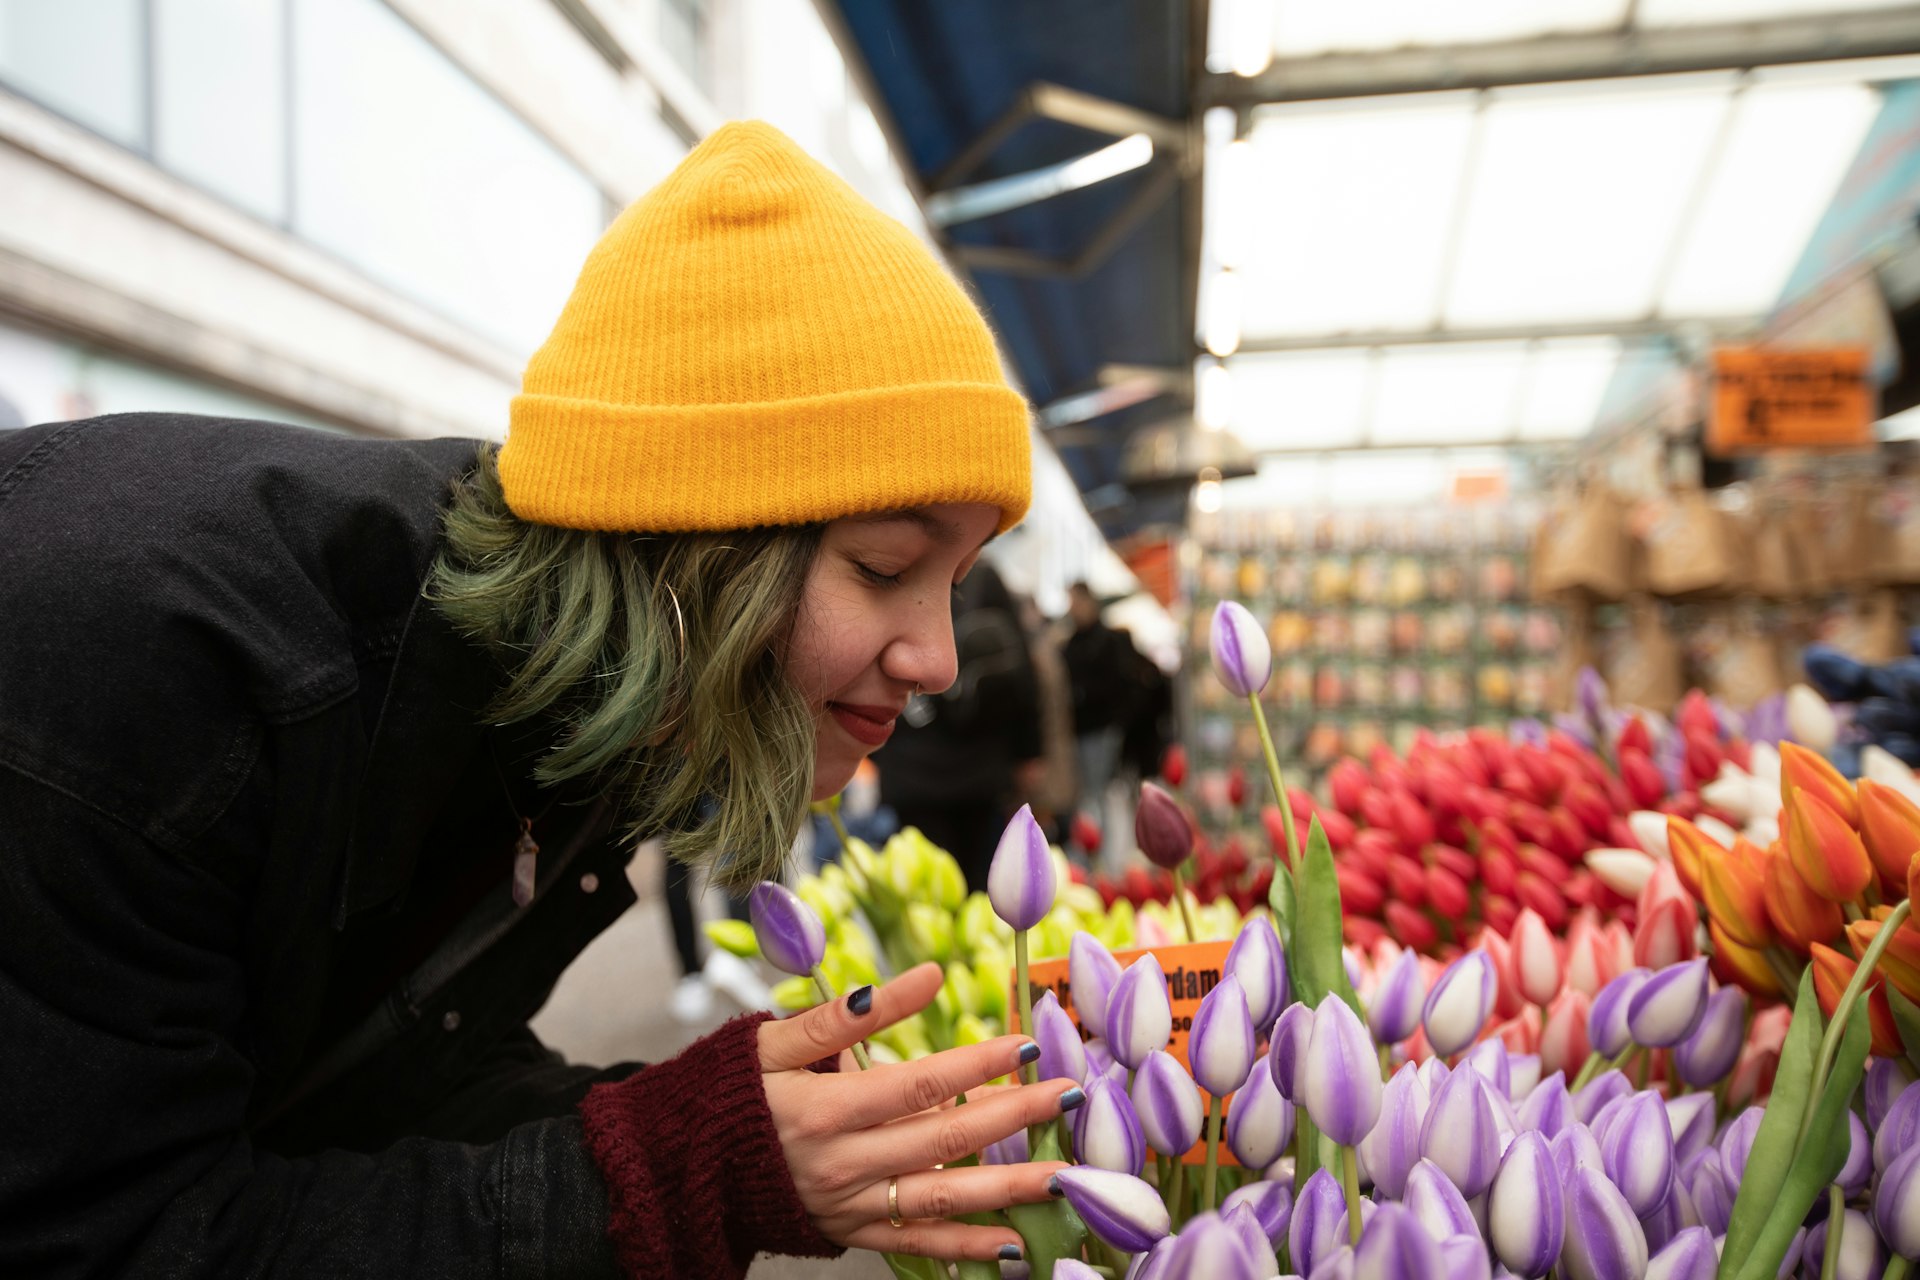 A woman wearing a yellow hat leans in to smell a bunch of tulips